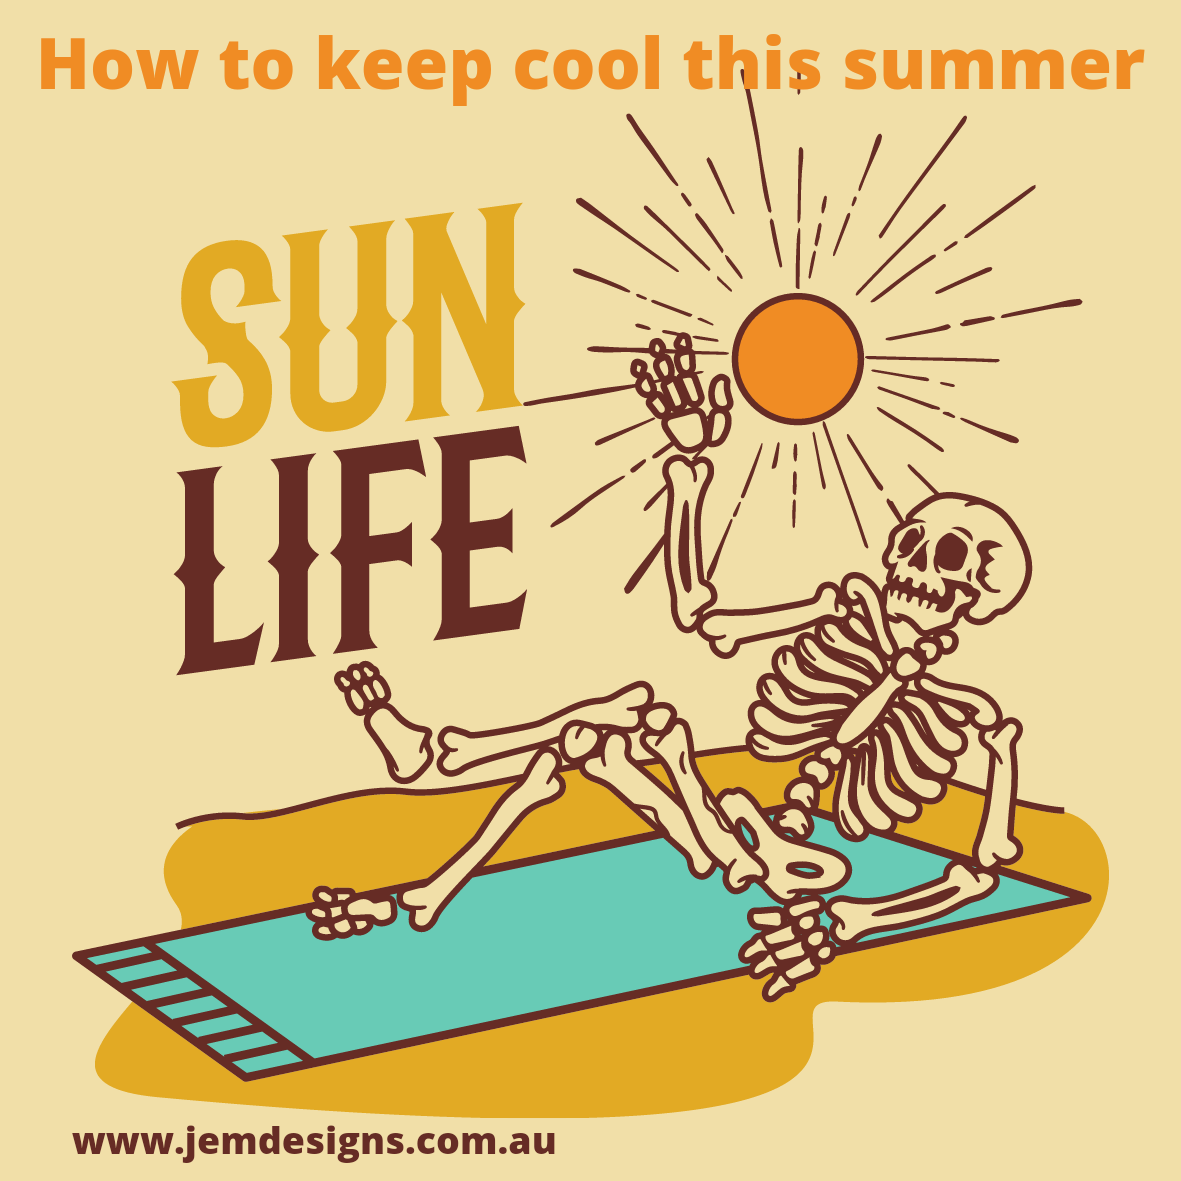 SUMMER……… HOW TO PLAN TO KEEP COOL THIS SUMMER  – AND KEEP YOUR BILLS DOWN